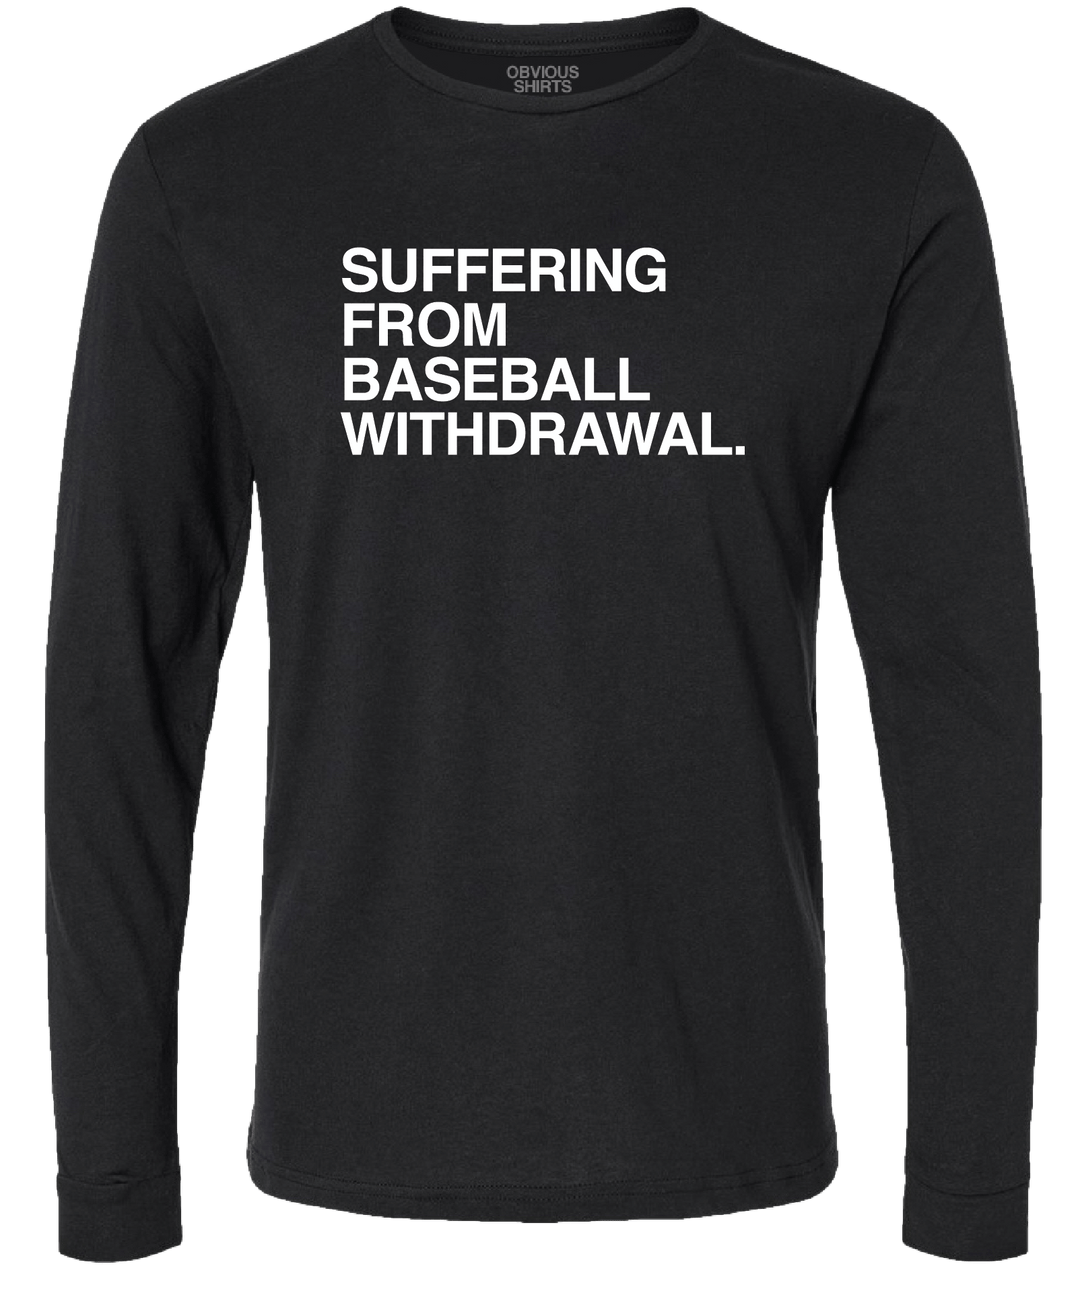 SUFFERING FROM BASEBALL WITHDRAWAL. (SOUTH SIDE) (LONGSLEEVE) - OBVIOUS SHIRTS